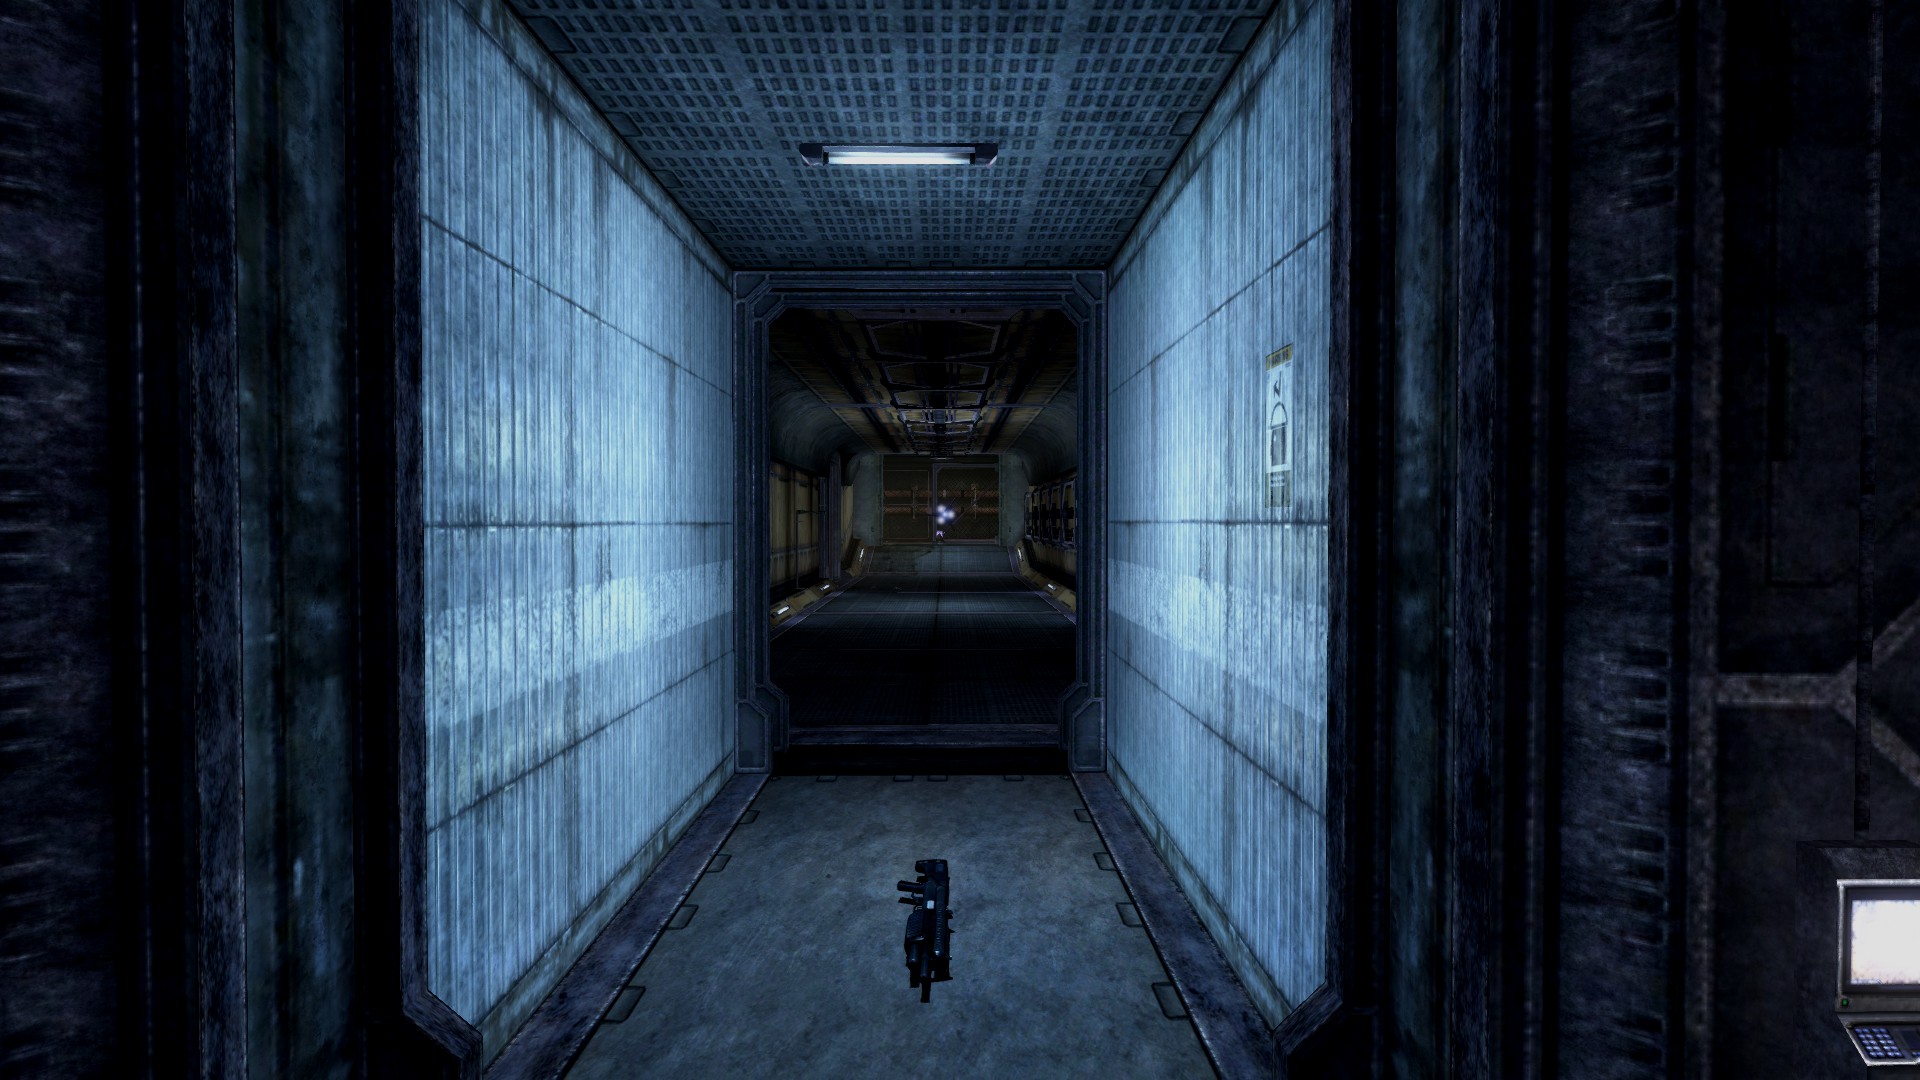 The hallway connecting the two spawn rooms features a shotgun in the middle.